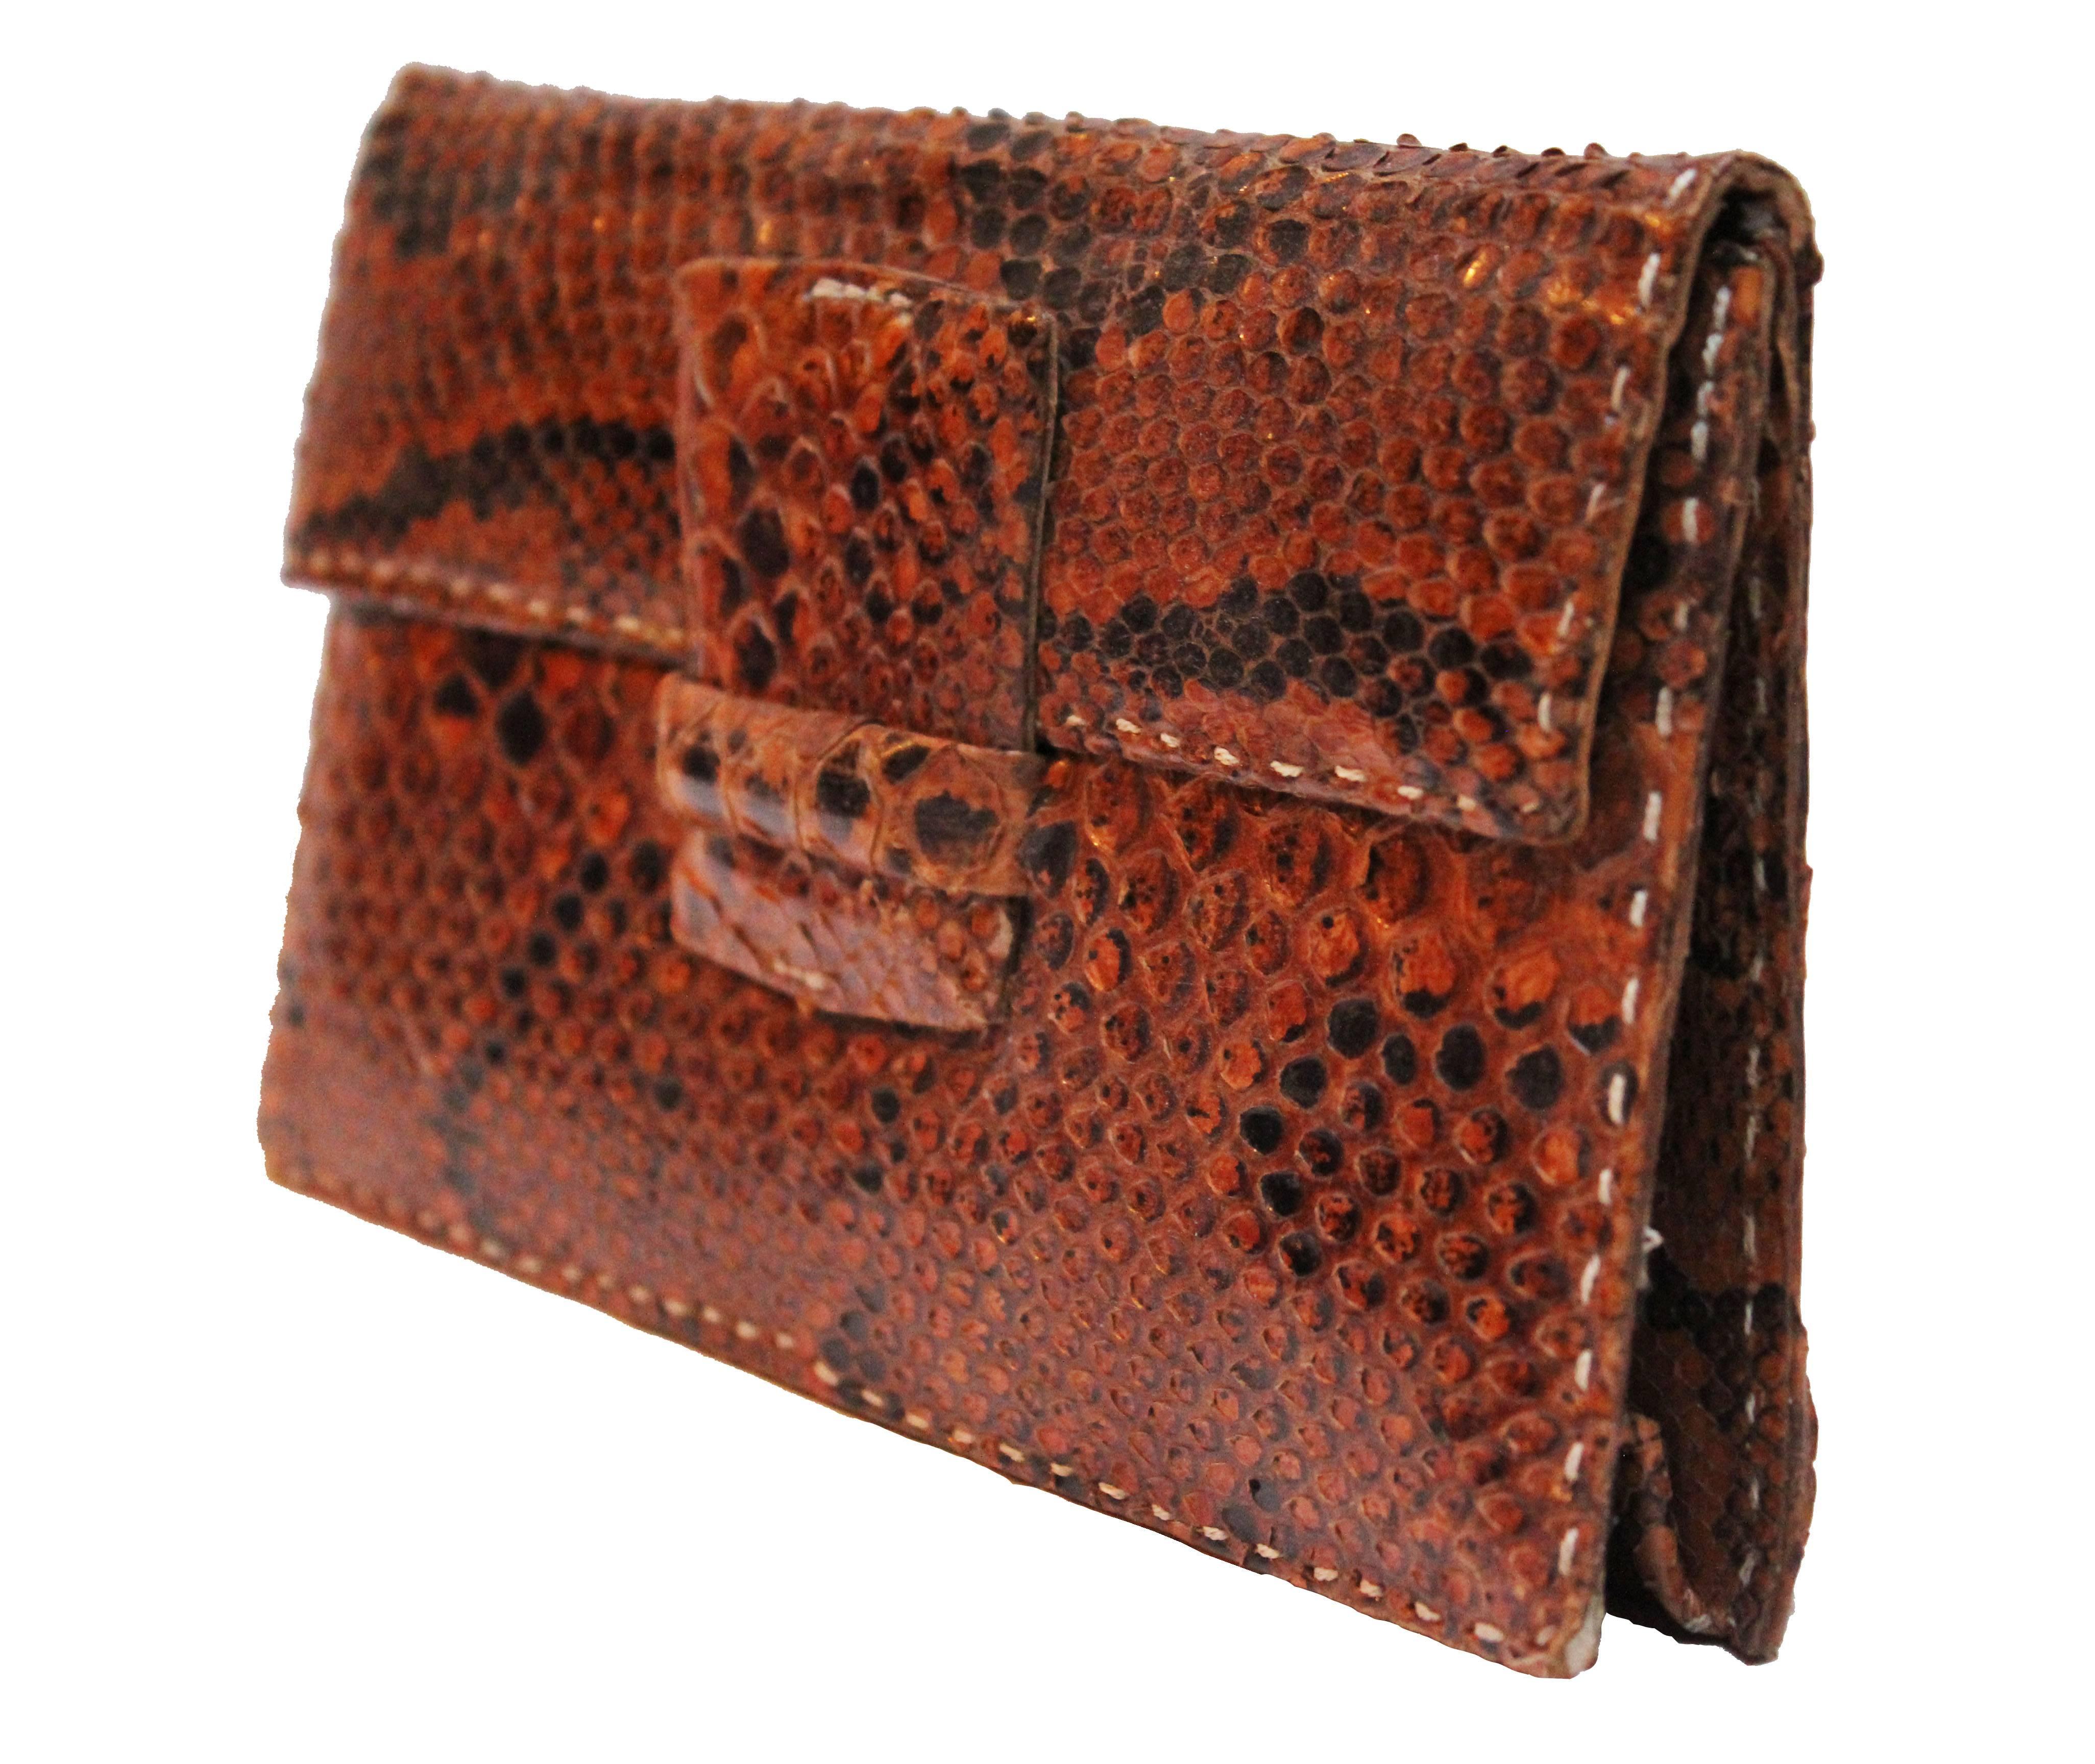 This is a really gorgeous little snake skin clutch bag in a rich dark tan colour. It is in near perfect condition, and a really gorgeous shape. It has a small pocket inside and is a great size to fit all of your essentials in. The fastening is a